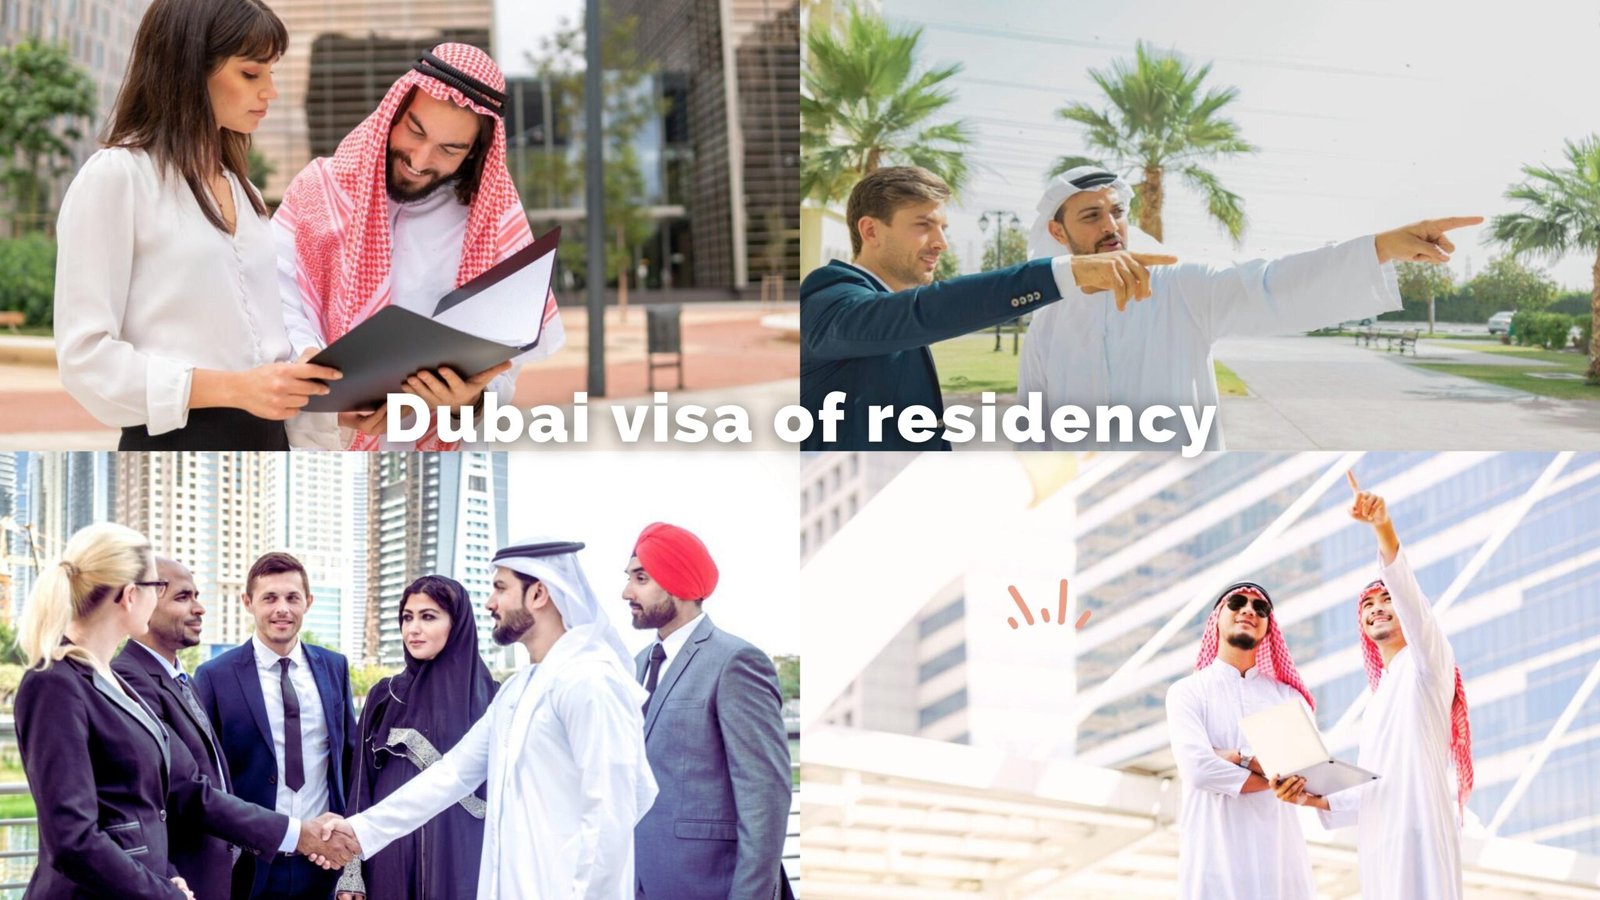 All you need to know about Dubai visa of residency